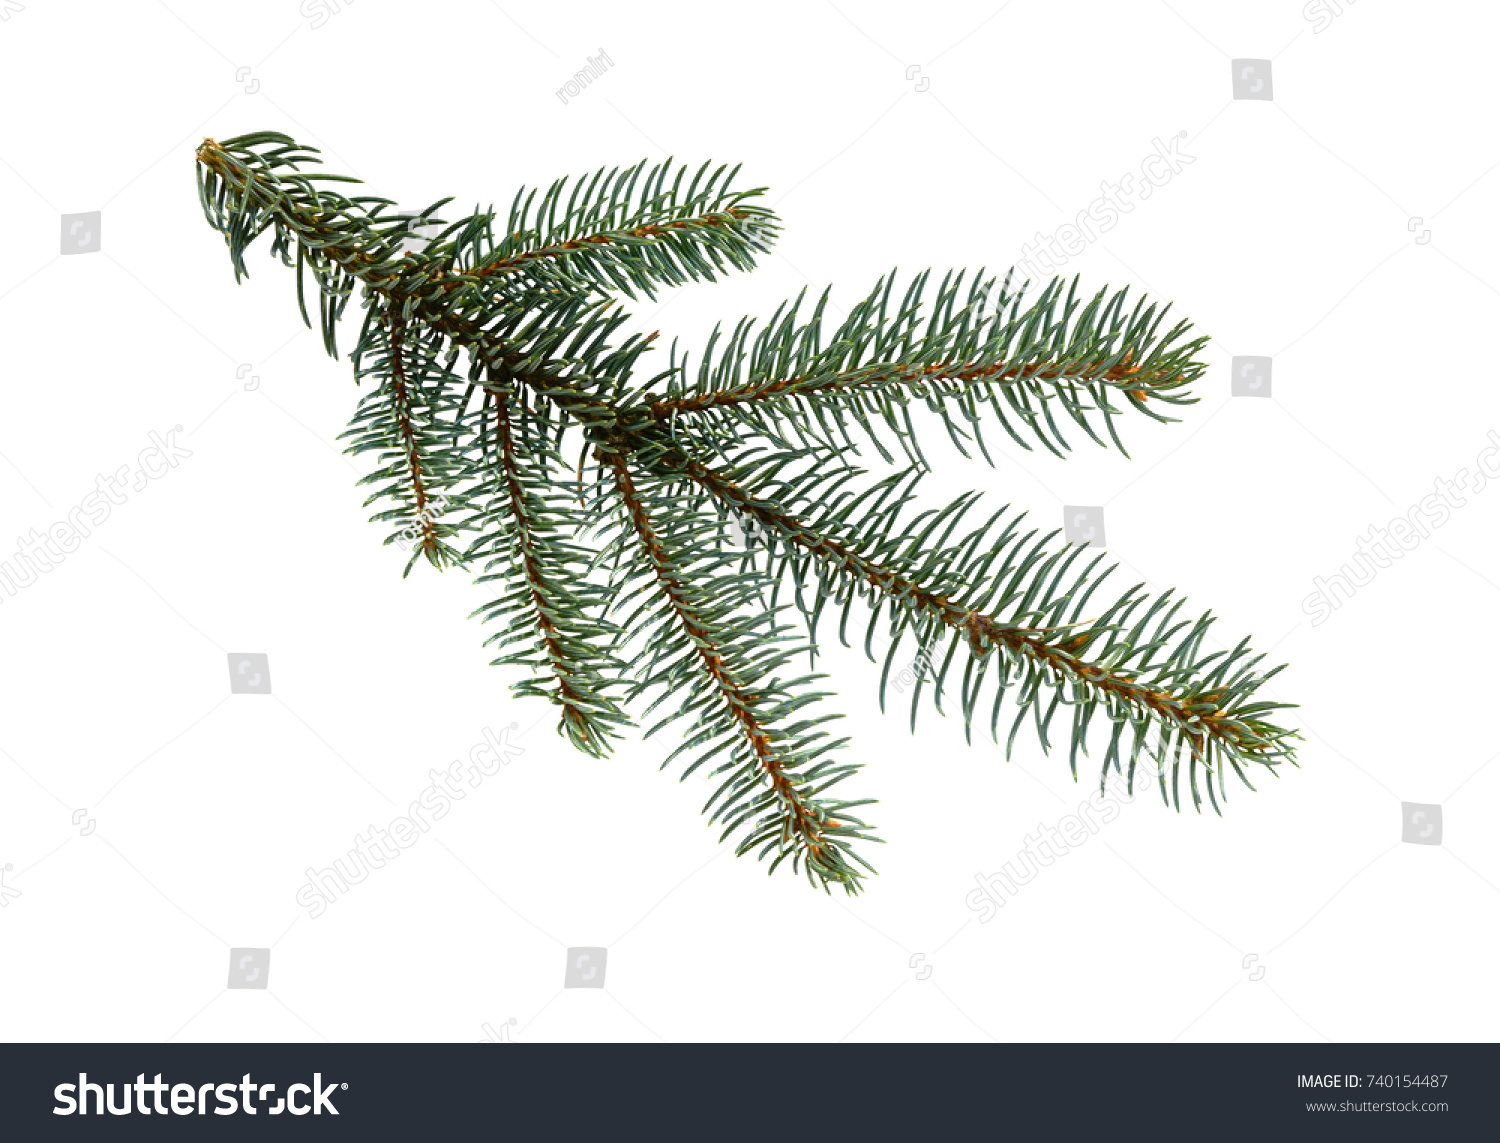 Fir tree branch isolated on white background. Pine branch. Christmas background. #740154487